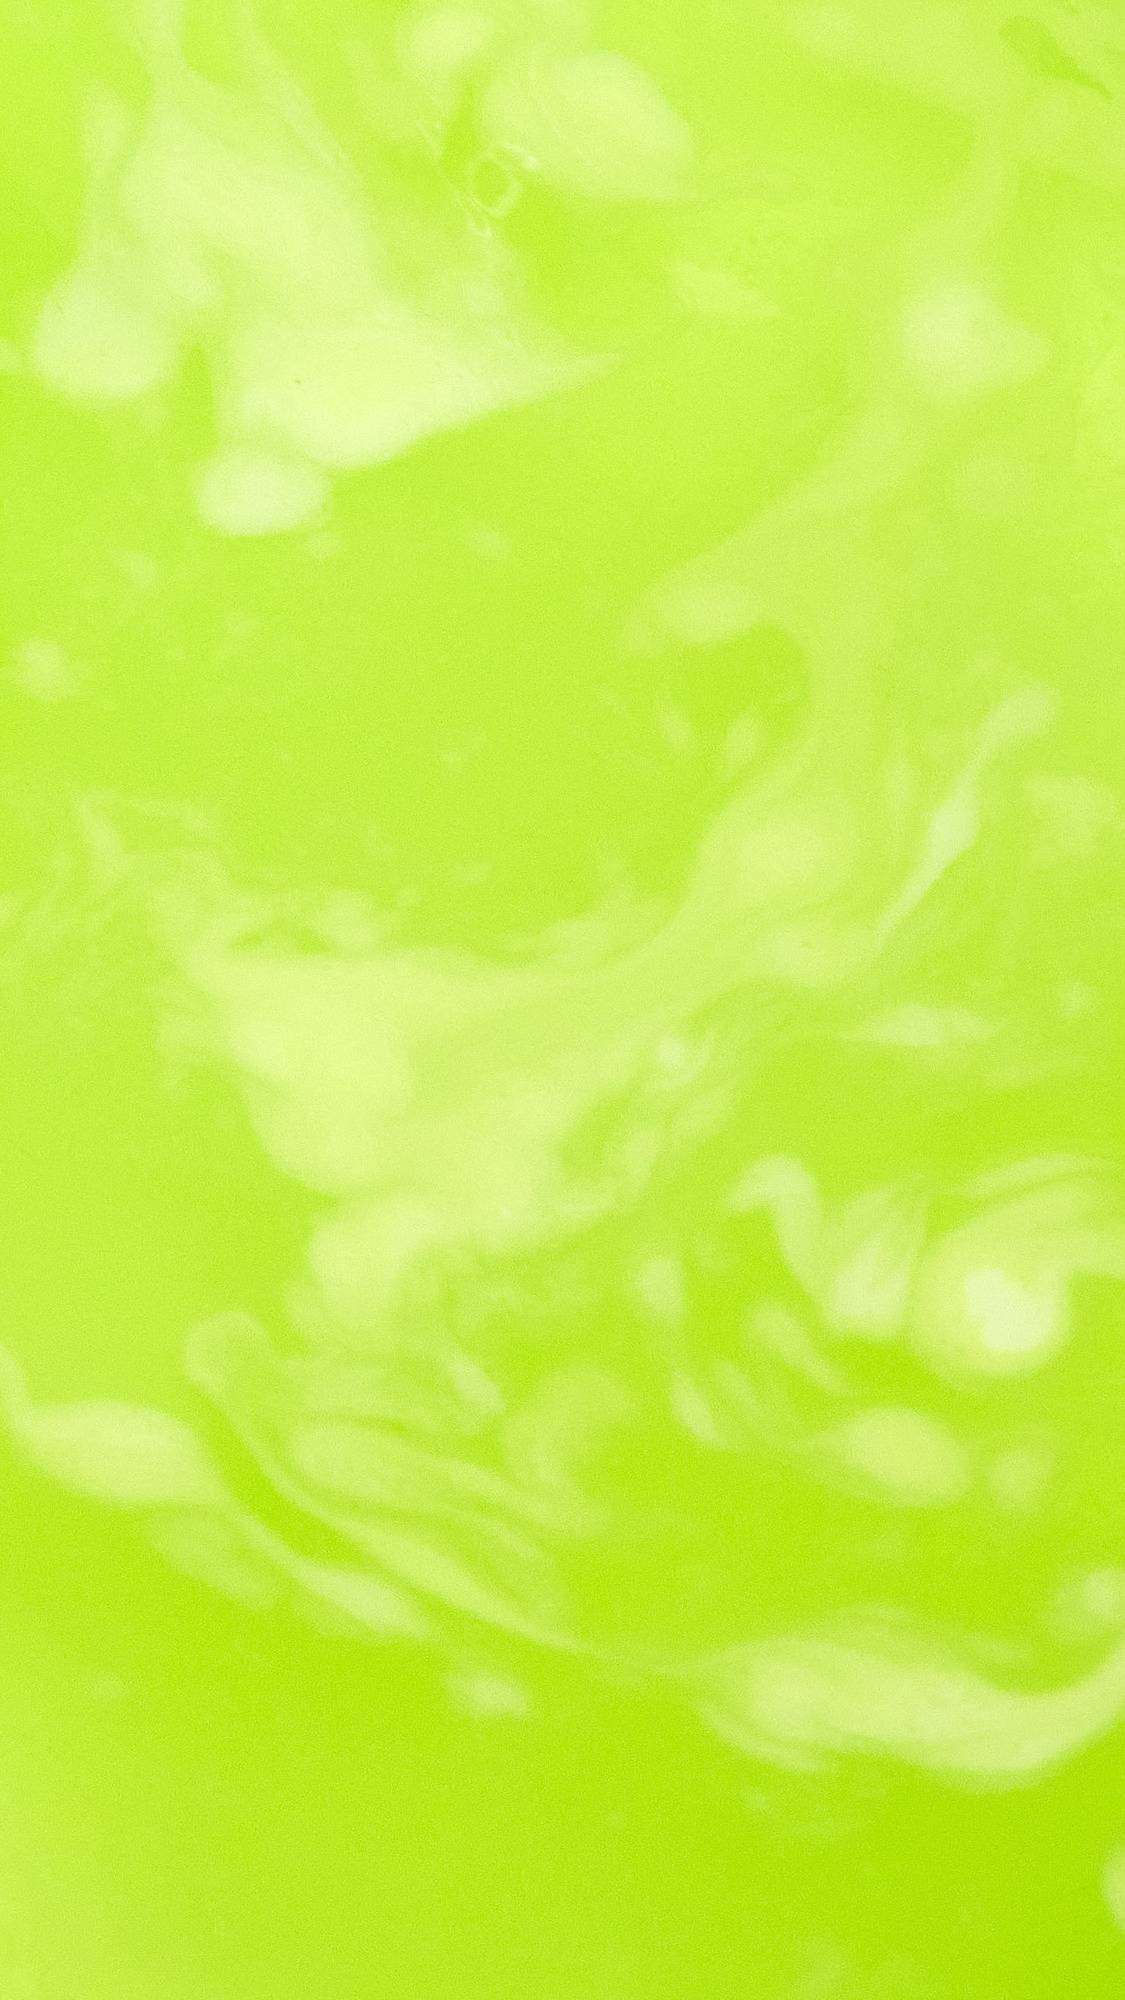 The Slammer bath bomb has completely dissolved leaving behind a vivid, lime-green sea of water. 